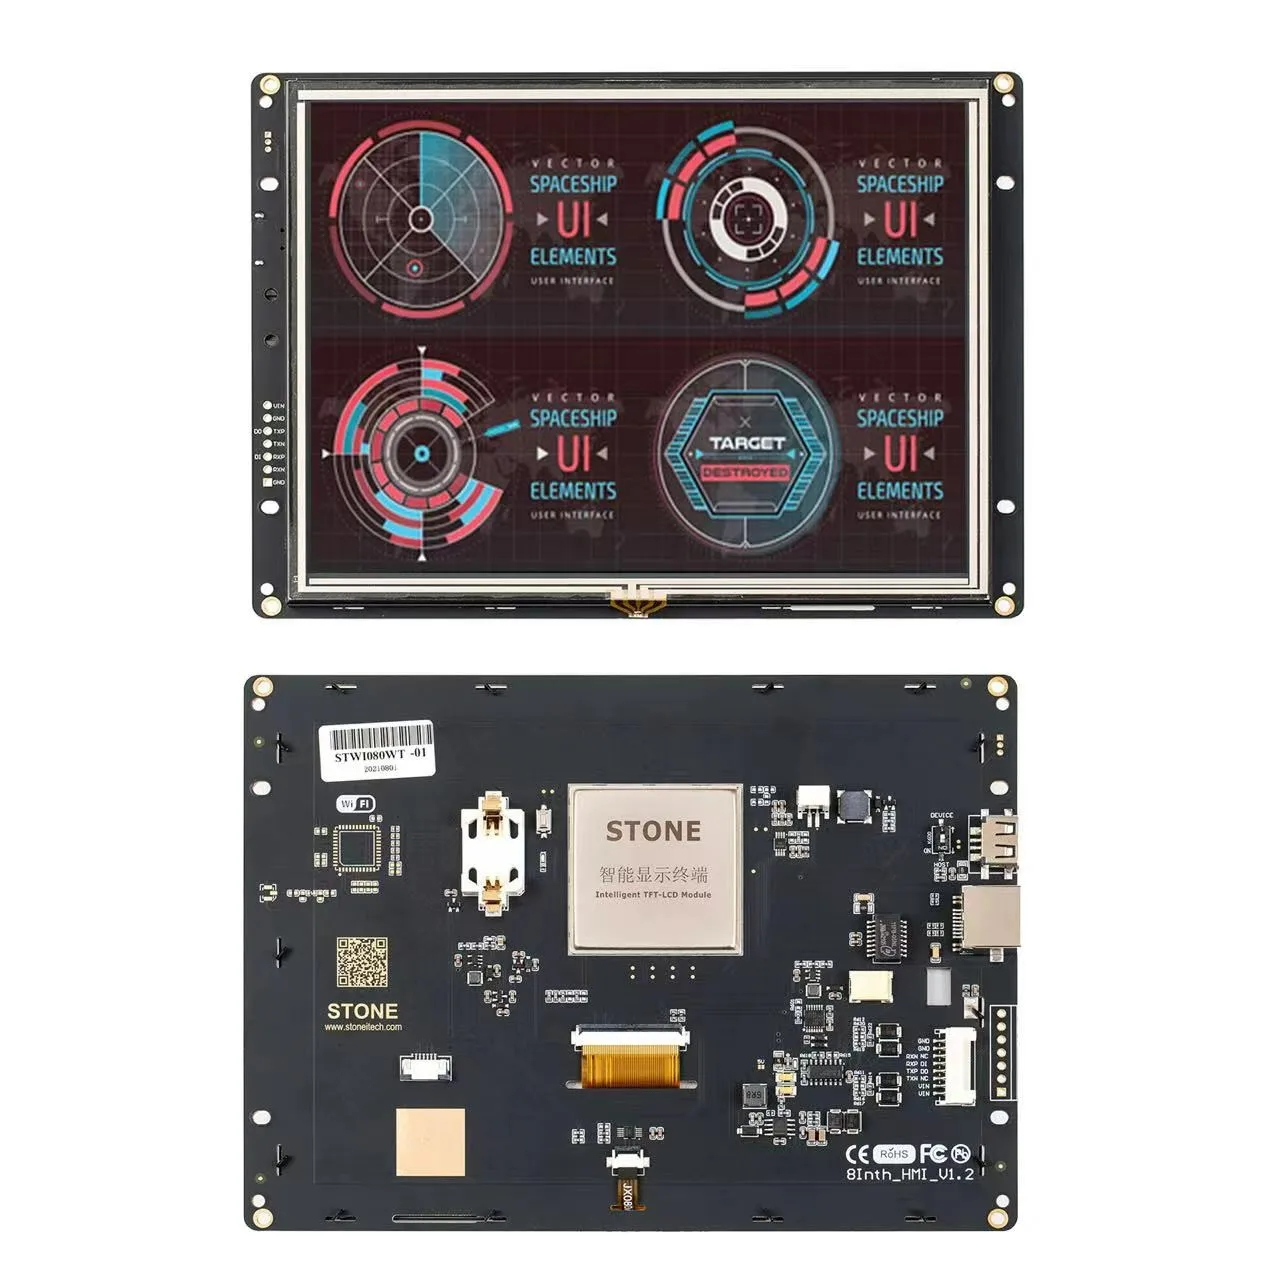 SCBRHMI 8 Inch LCD-TFT HMI Display Resistive Touch Panel Module Intelligent Series RGB 65K Color with Enclosure